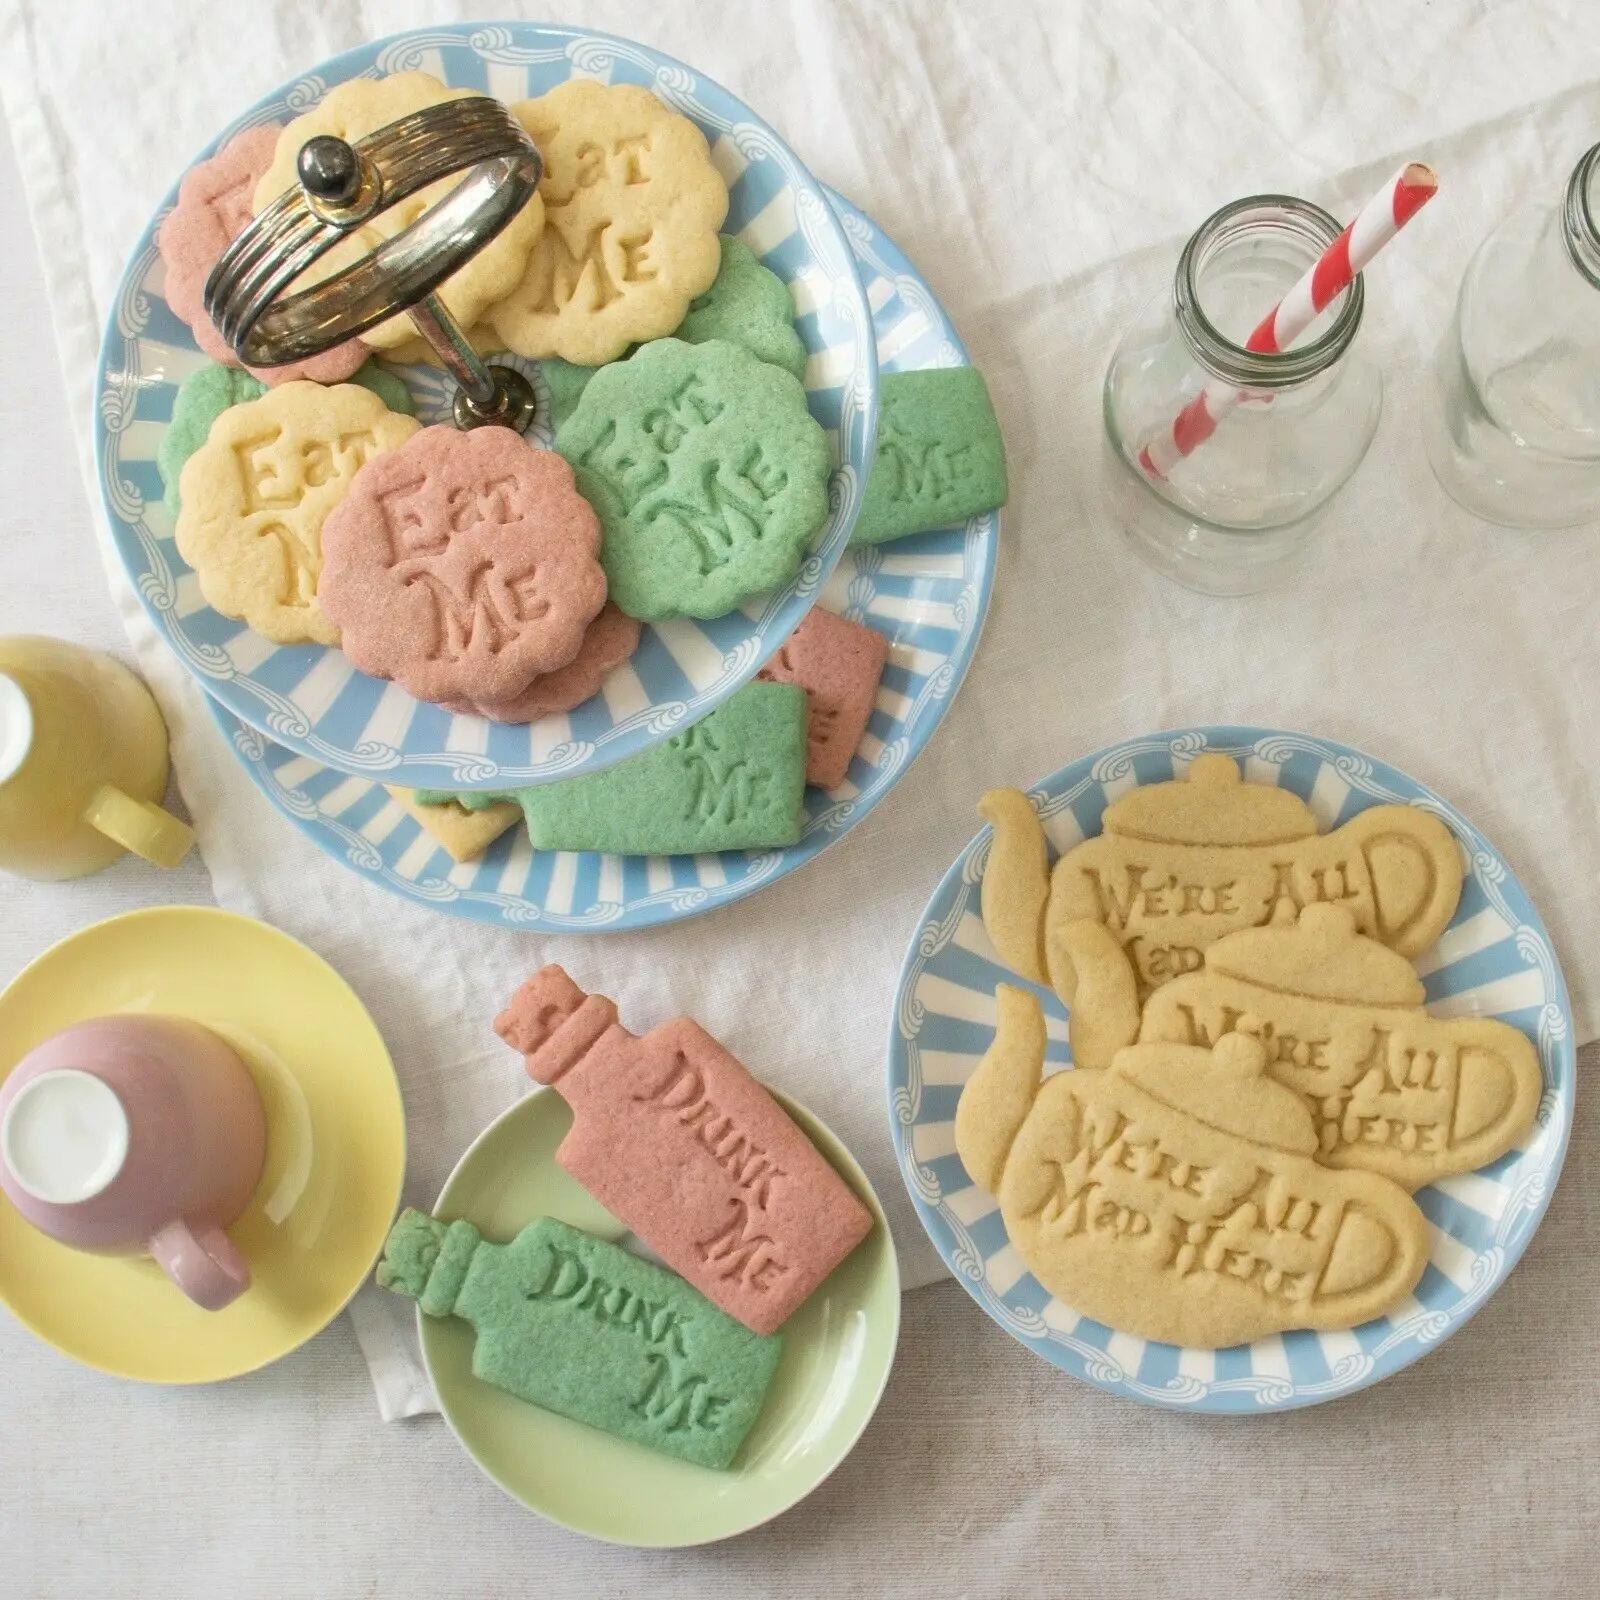 

2022 New Eat Me/Drink Me/We Are All Mad Here Cookie Molds Cookie Cutters Molds with Good Wishes DIY Cookies Fondant Stamp Tools